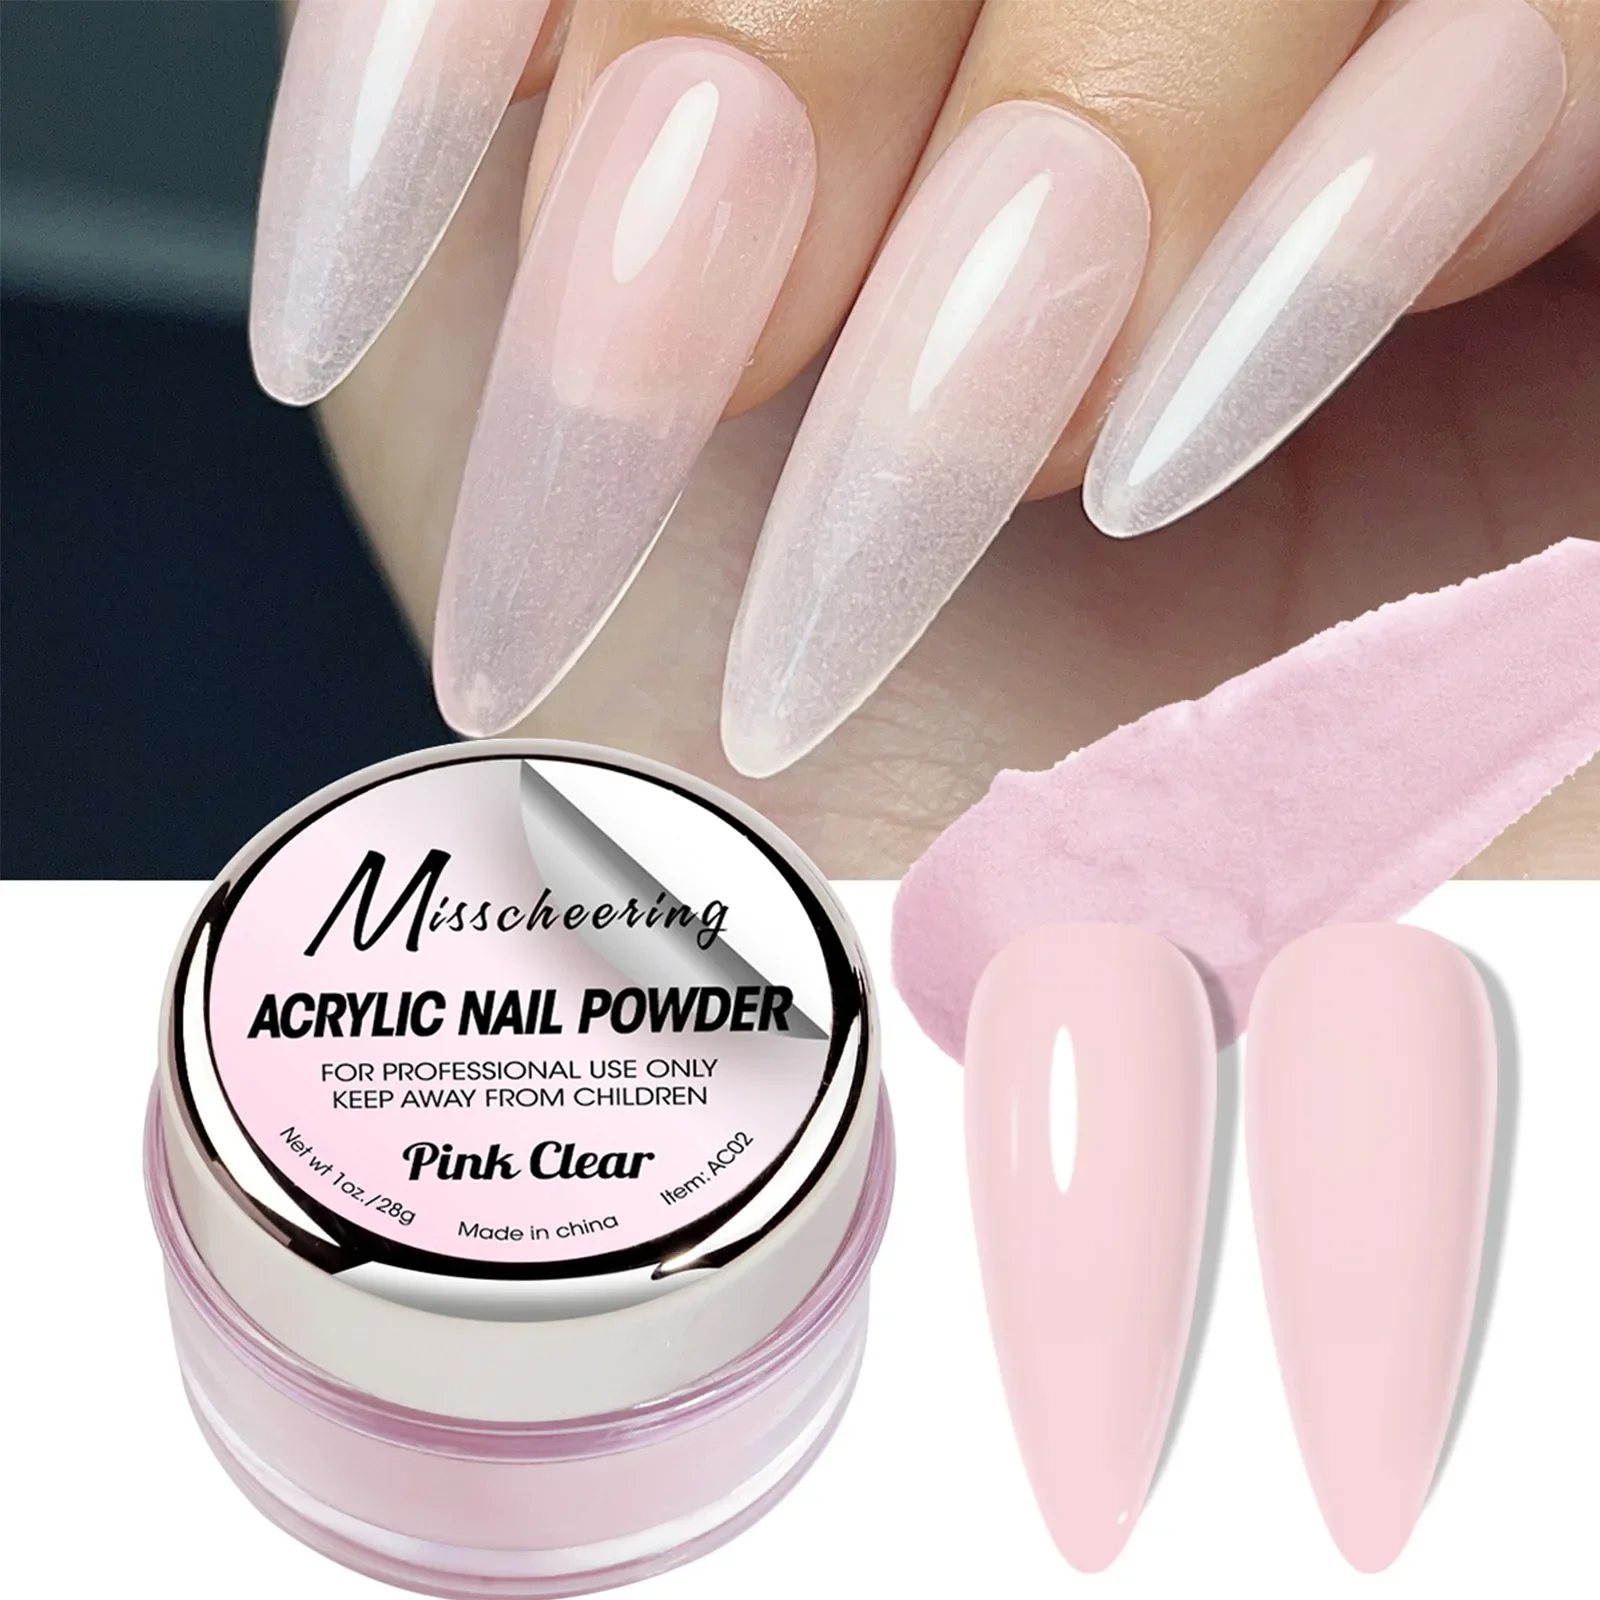 Nude / Pink / Ultra-pink acrylic powder for dipping and sculpting